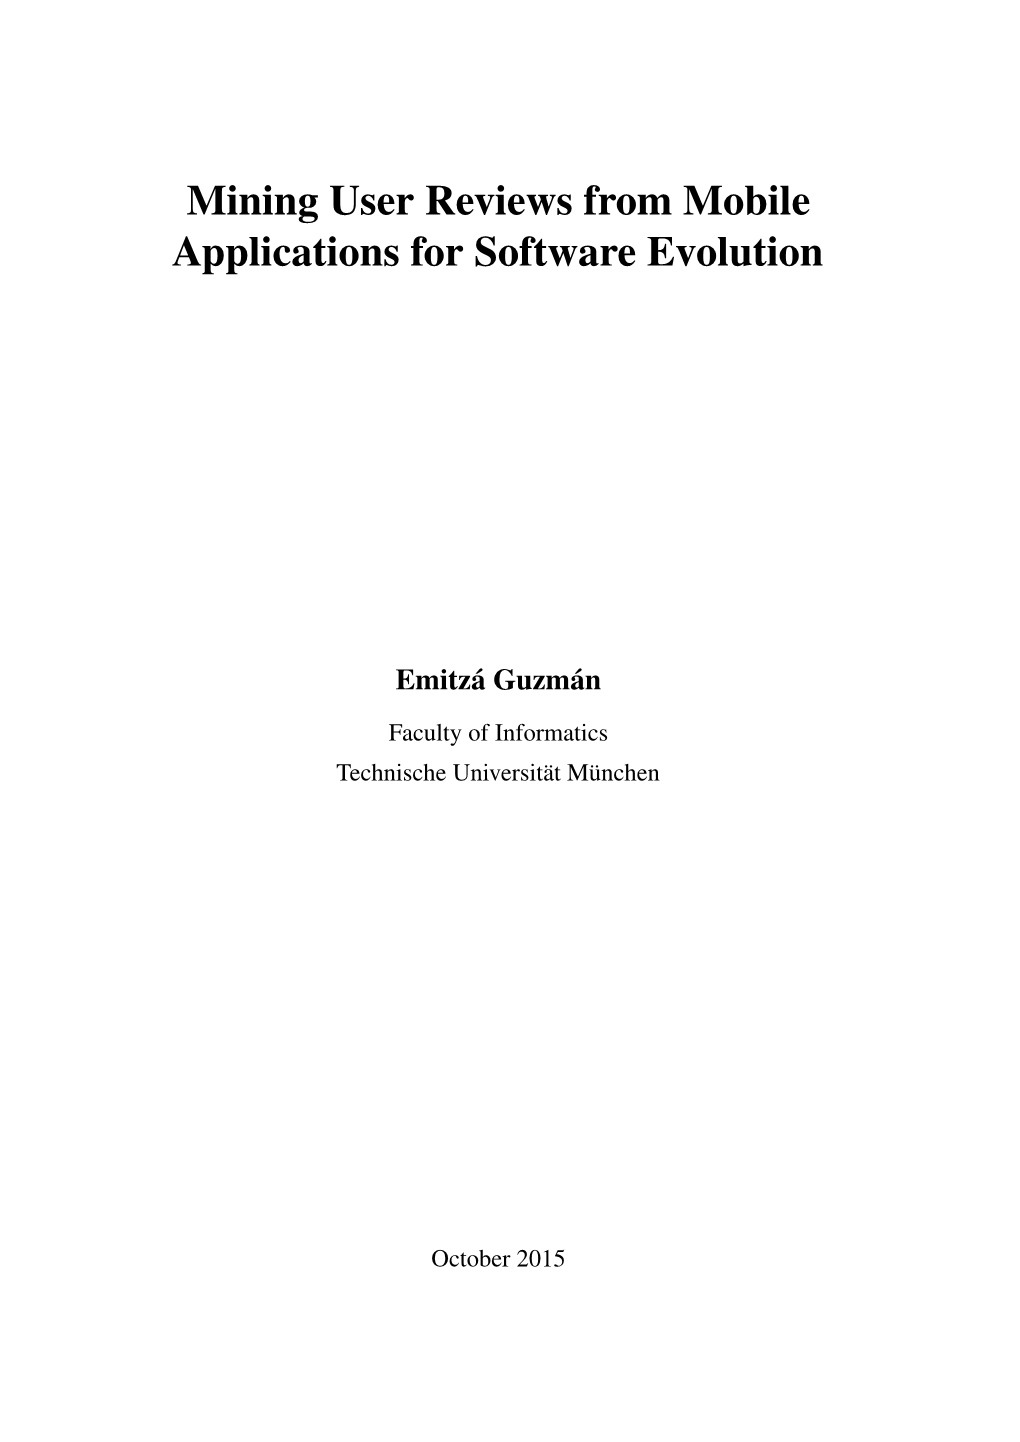 Mining User Reviews from Mobile Applications for Software Evolution